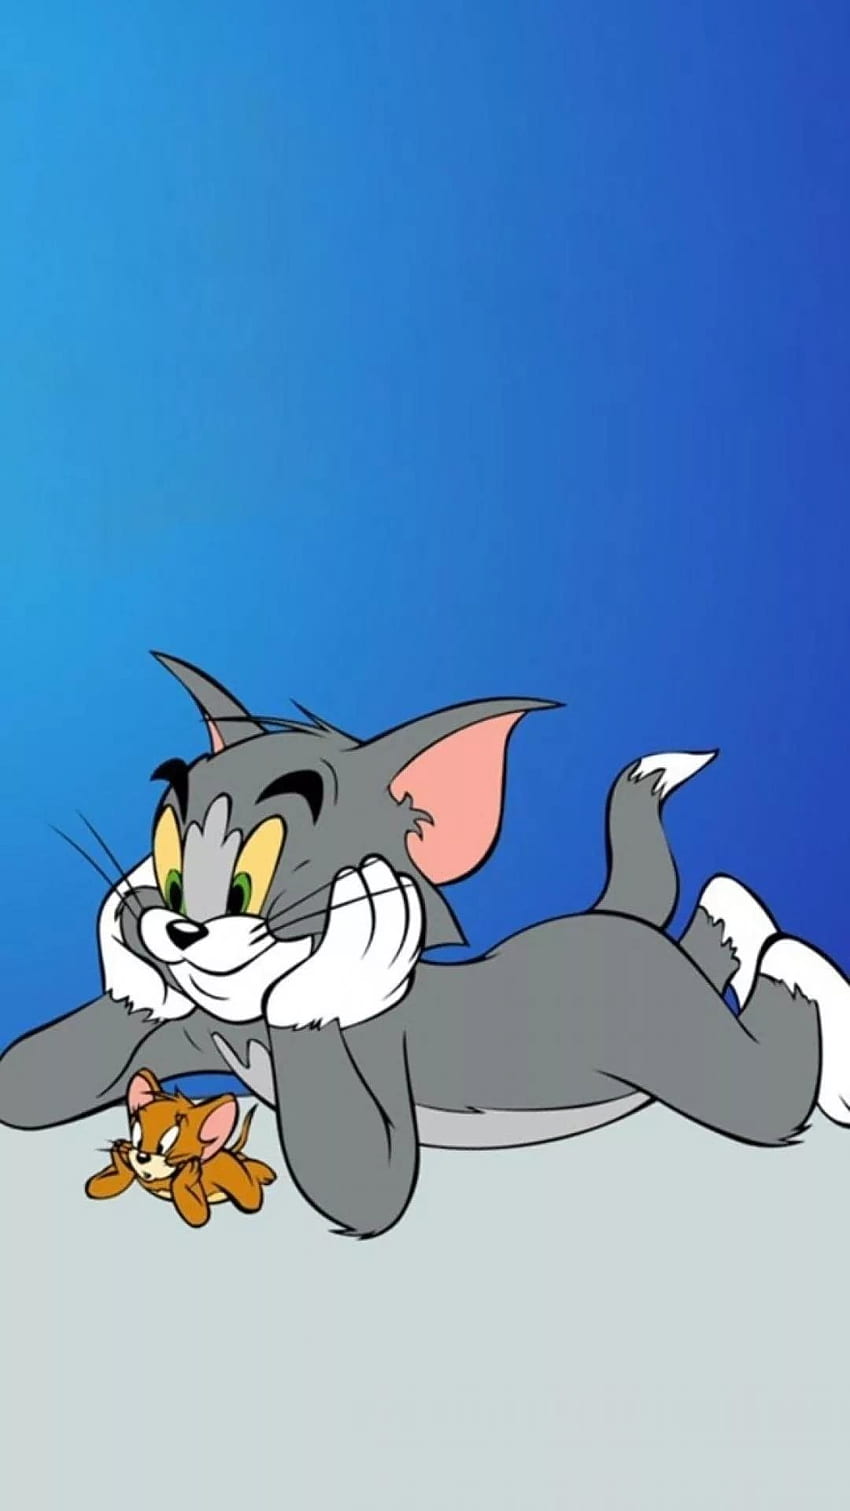 HD wallpaper: Tom And Jerry Desktop Hd Wallpaper For Pc Tablet And Mobile  1920×1080 | Wallp… | Tom and jerry wallpapers, Tom and jerry cartoon, Hd  wallpapers for pc